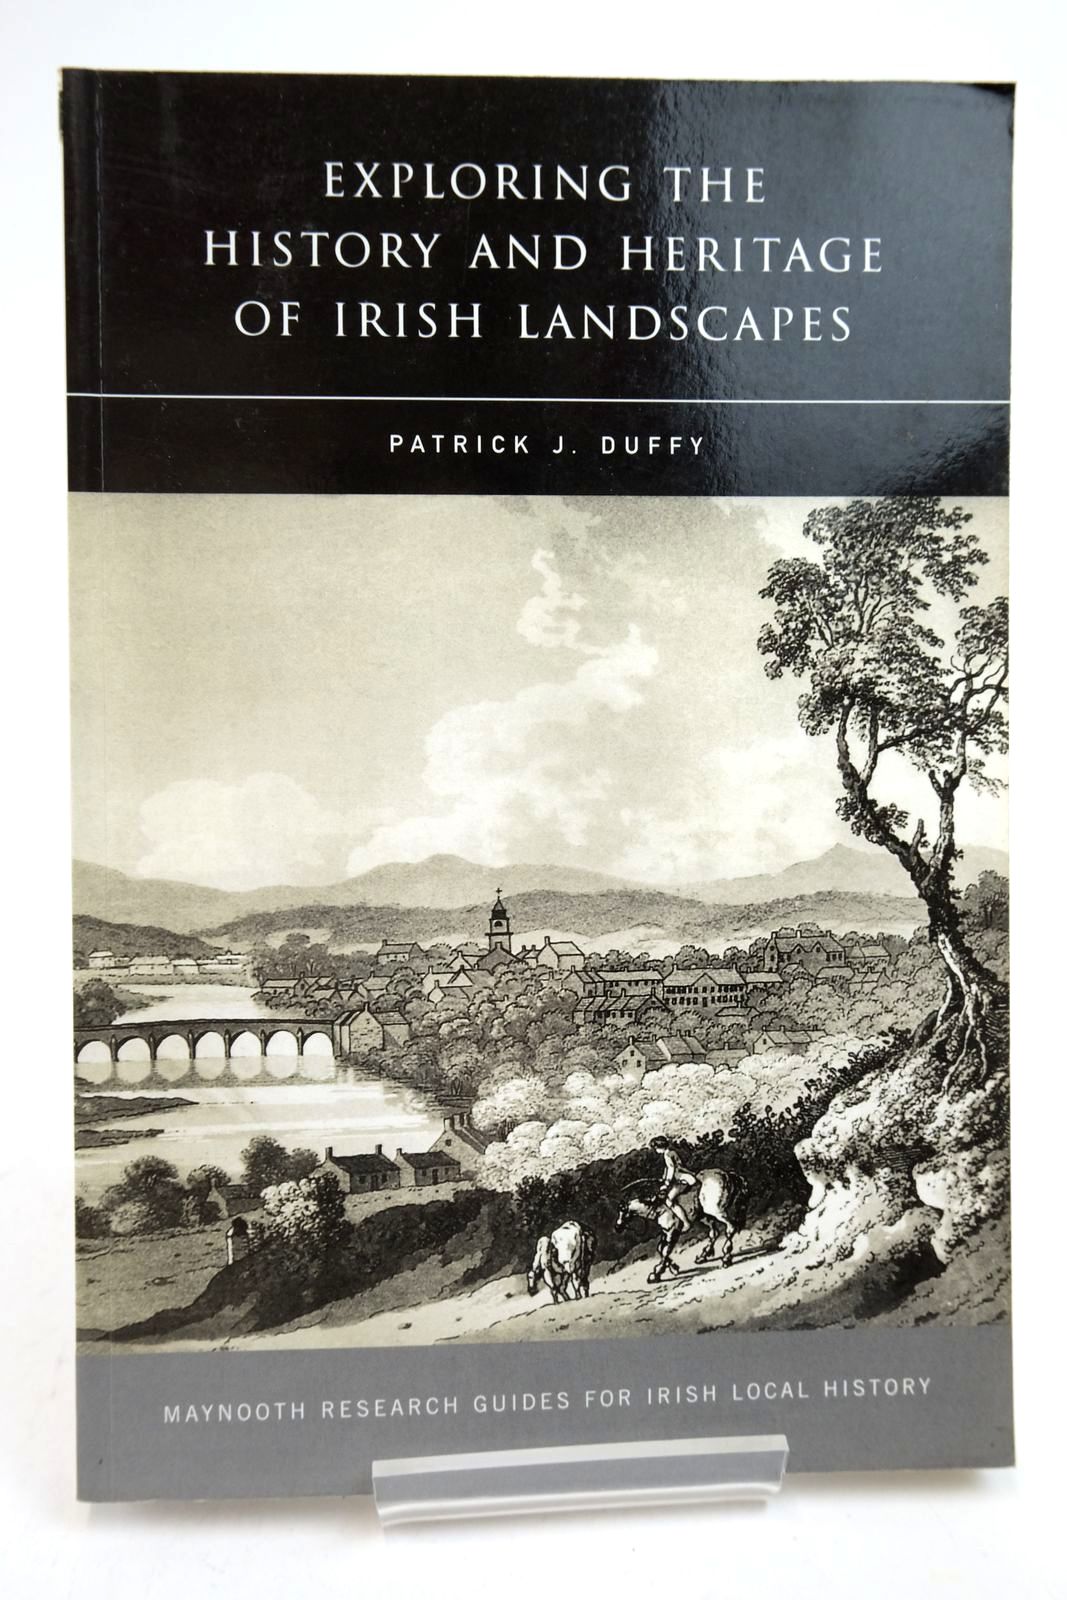 Photo of EXPLORING THE HISTORY AND HERITAGE OF IRISH LANDSCAPES- Stock Number: 2140597